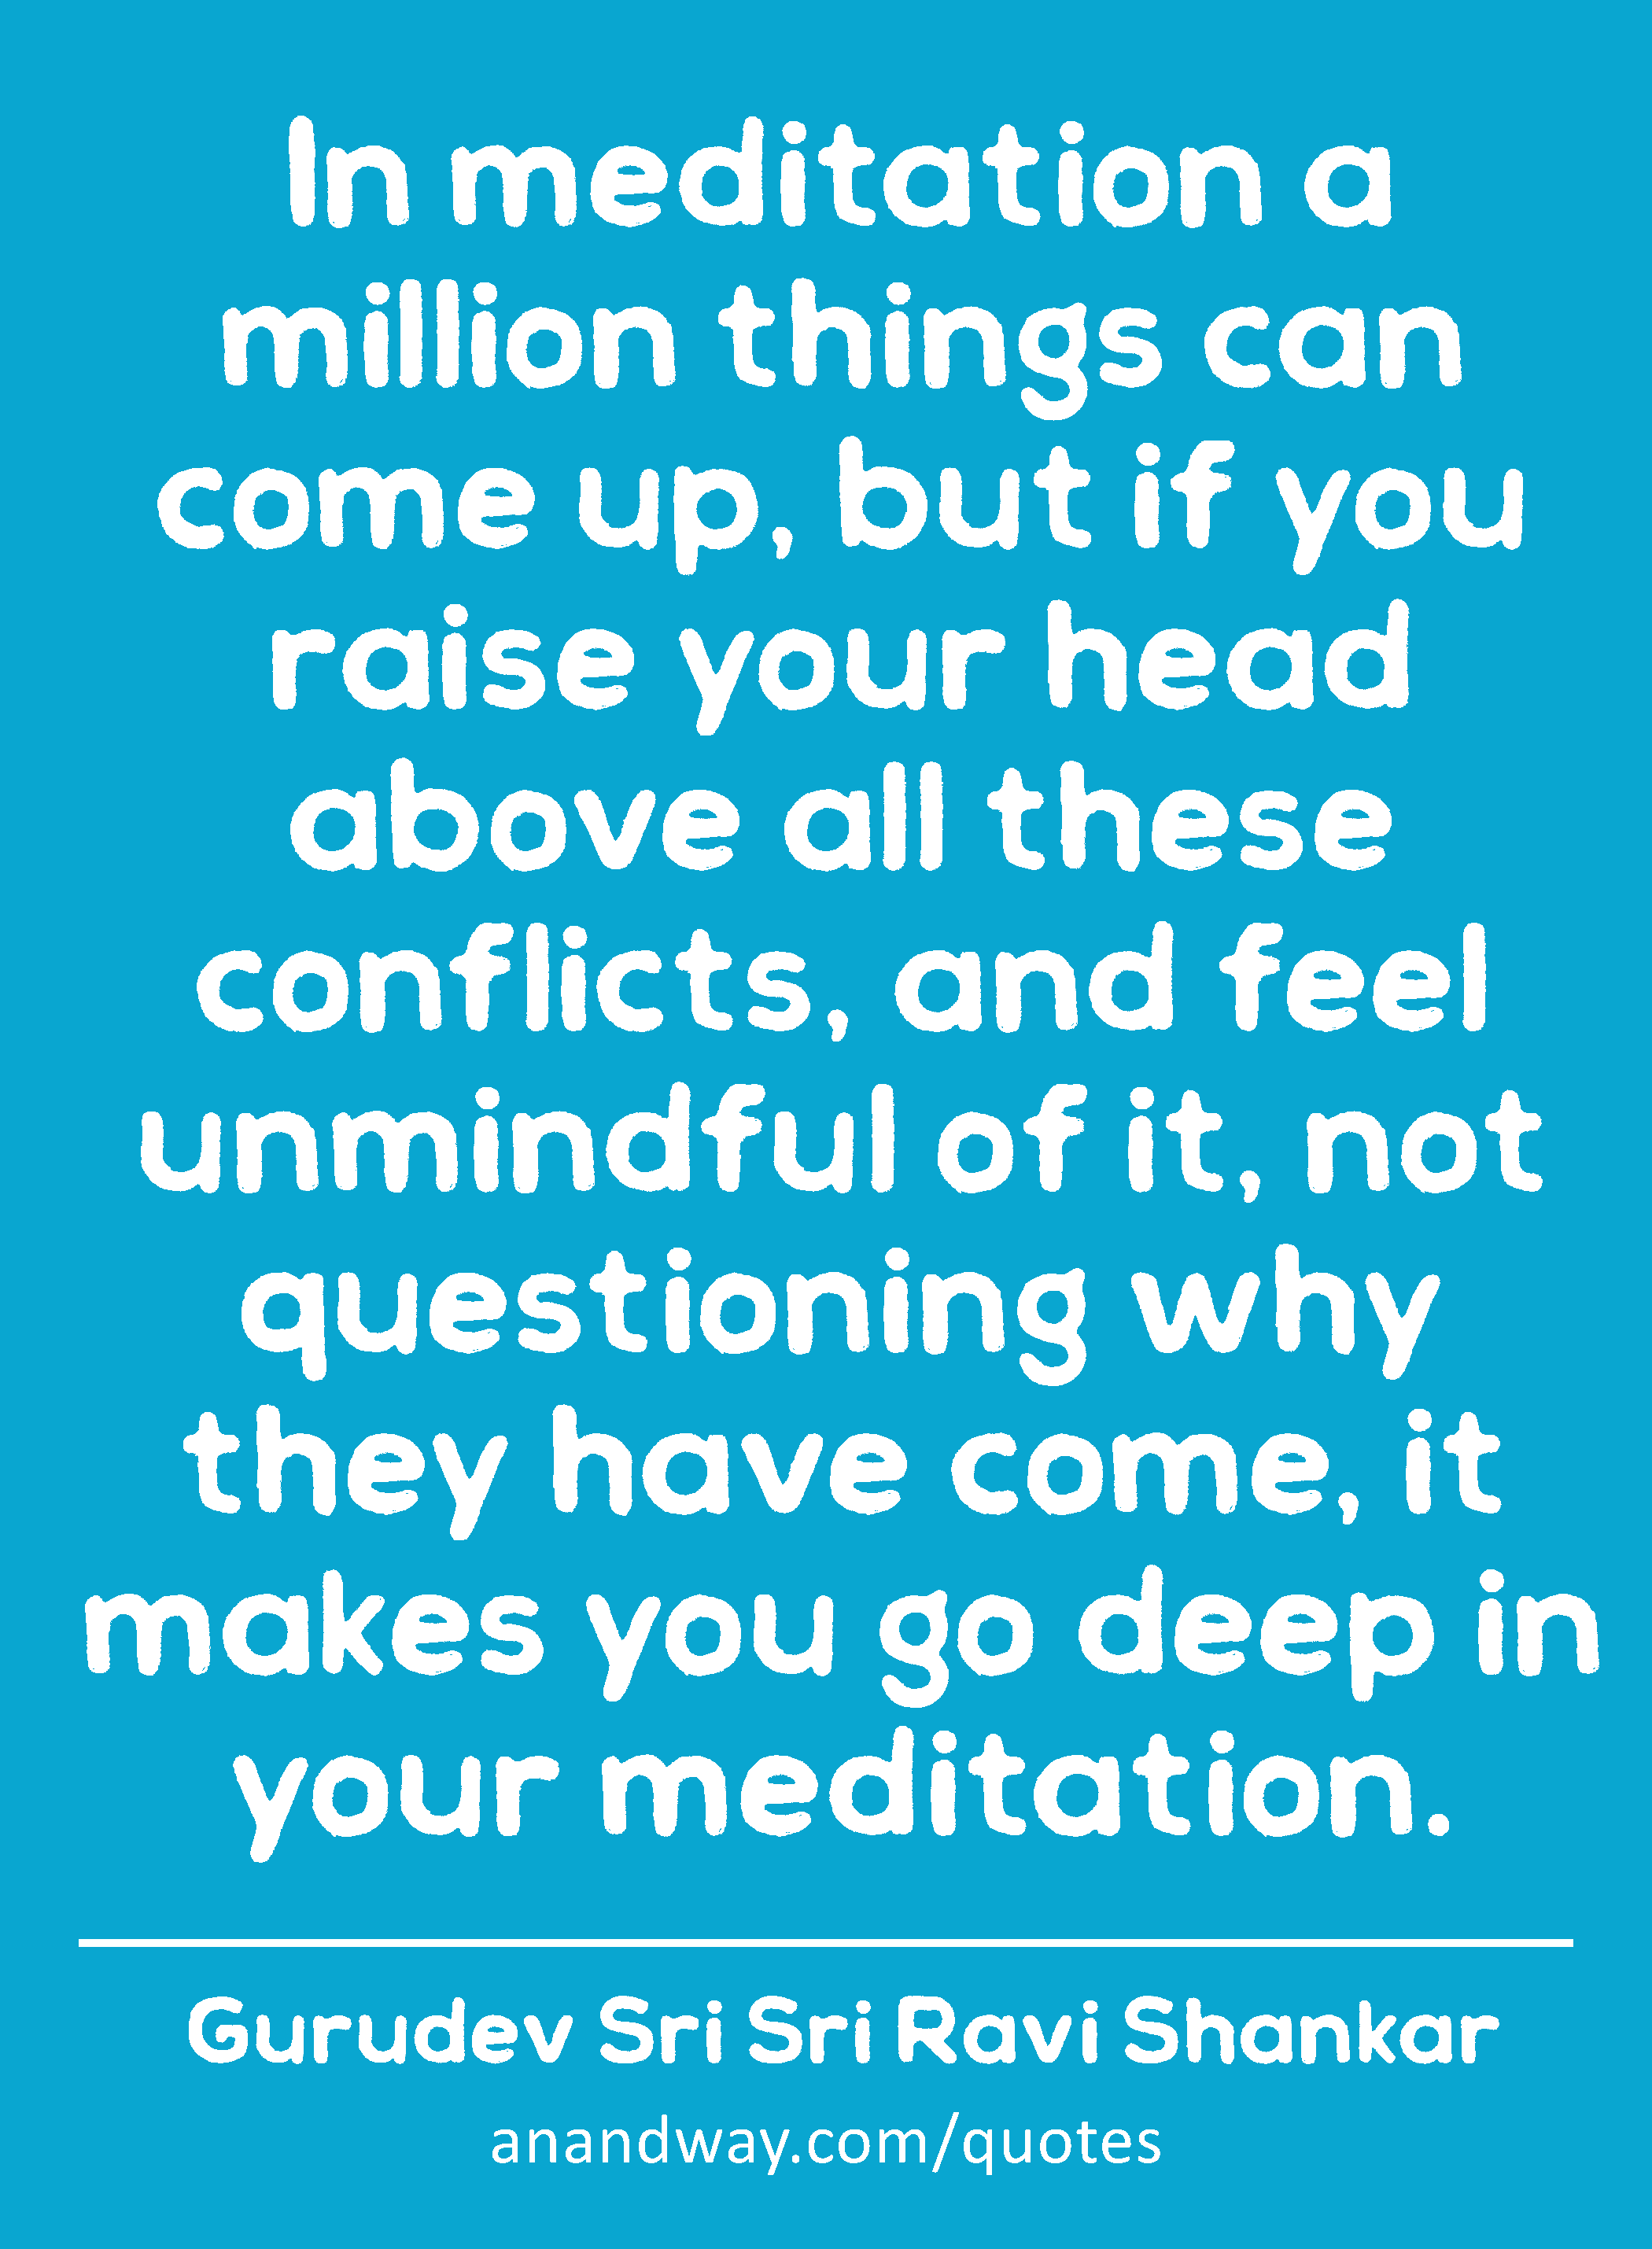 In meditation a million things can come up, but if you raise your head above all these conflicts,
 -Gurudev Sri Sri Ravi Shankar